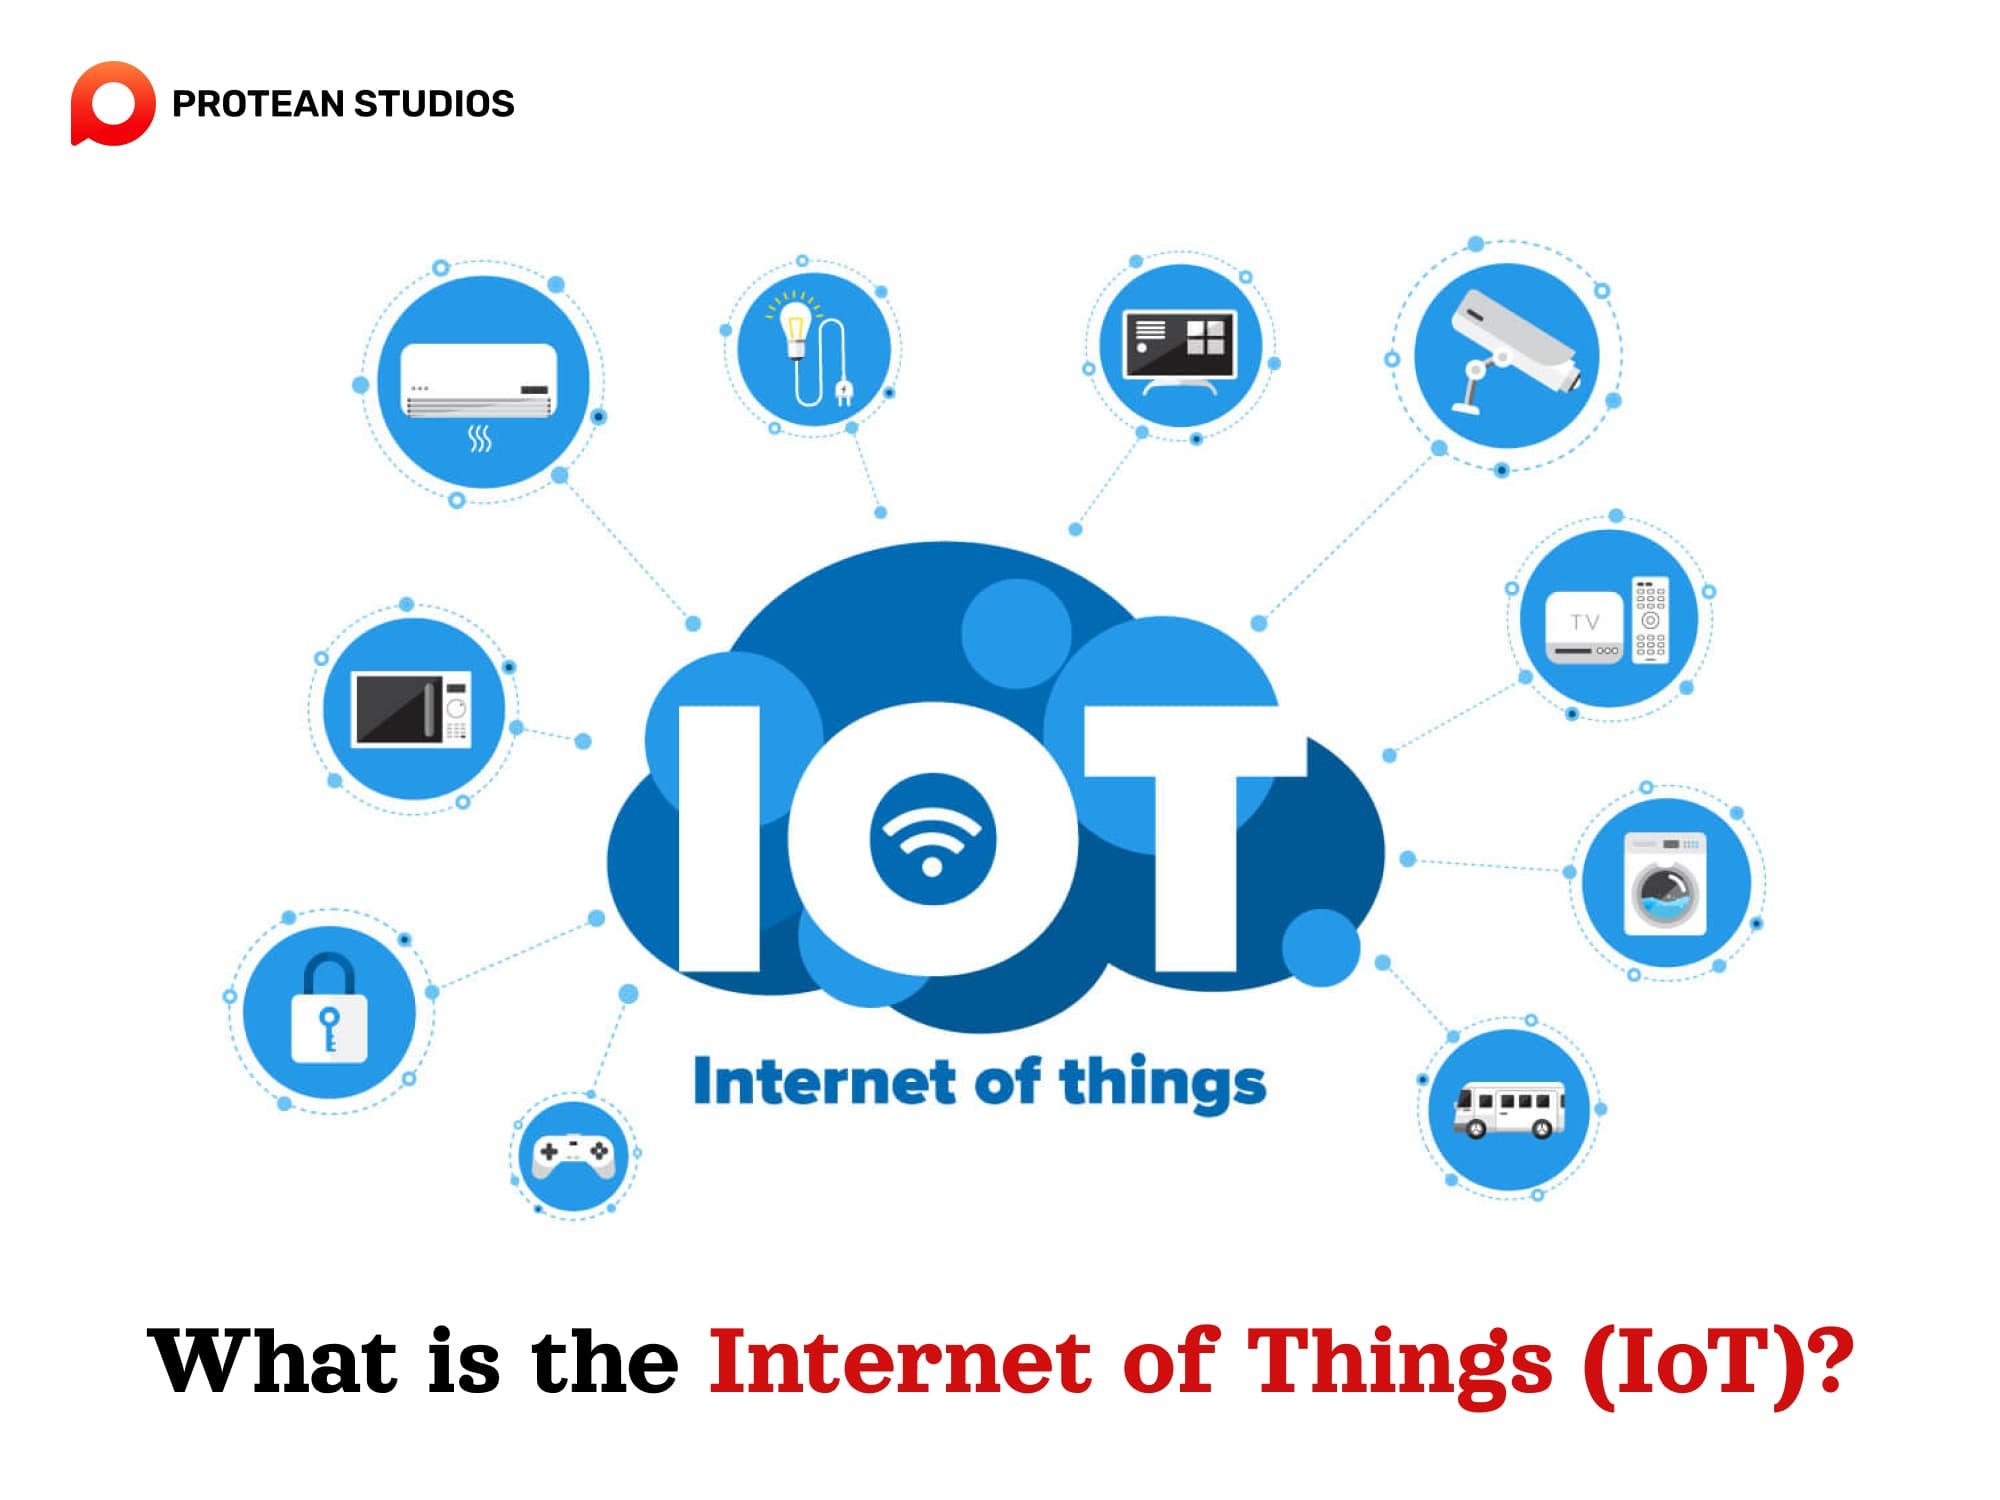 The definition of IoT